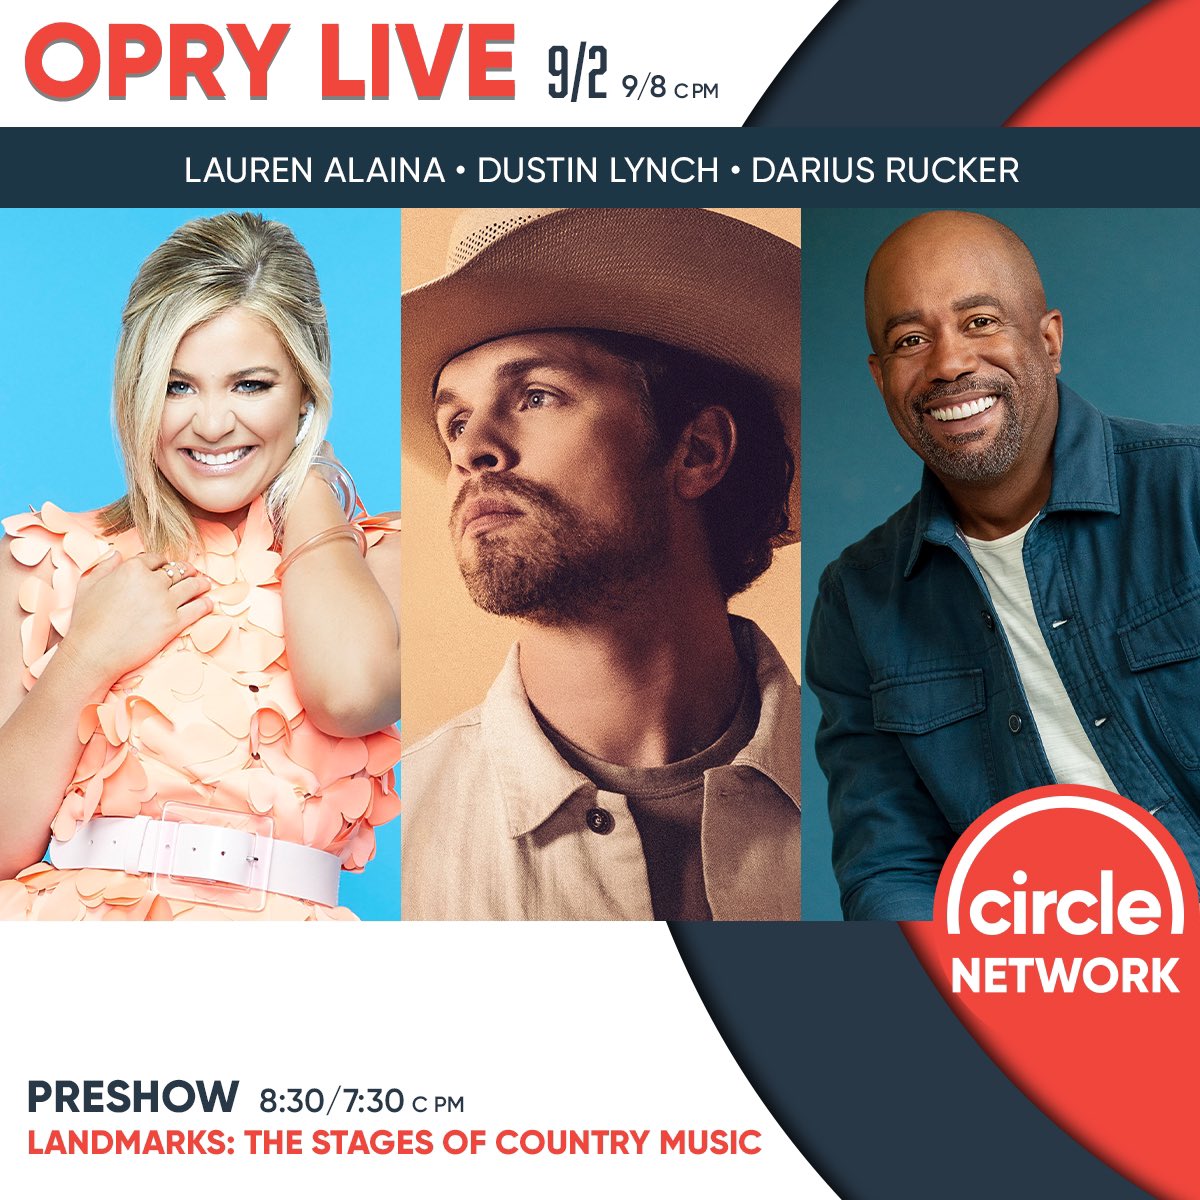 Join me, Dustin Lynch and Darius Rucker for a special Opry Live this Saturday at 9/8c pm. Download the new Circle Now app to stream. #OpryLive #CircleAllAccess  Watch here: youtube.com/live/7rBbg8SiZ… @opry @CircleAllAccess